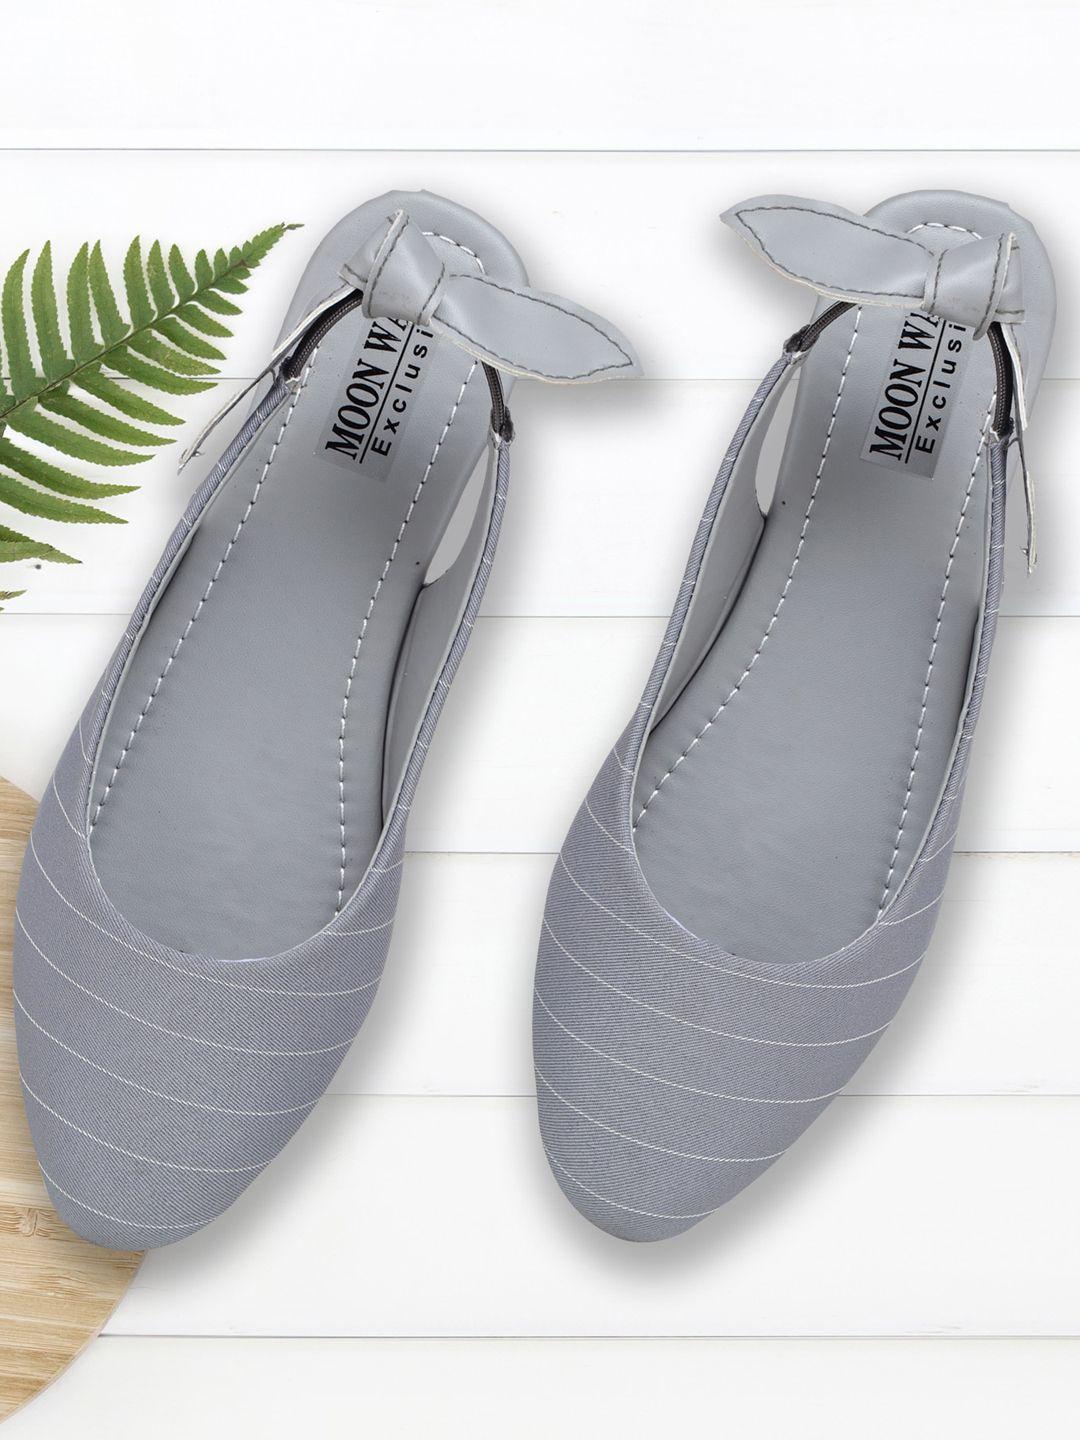 moonwalk women grey striped mules with bows flats